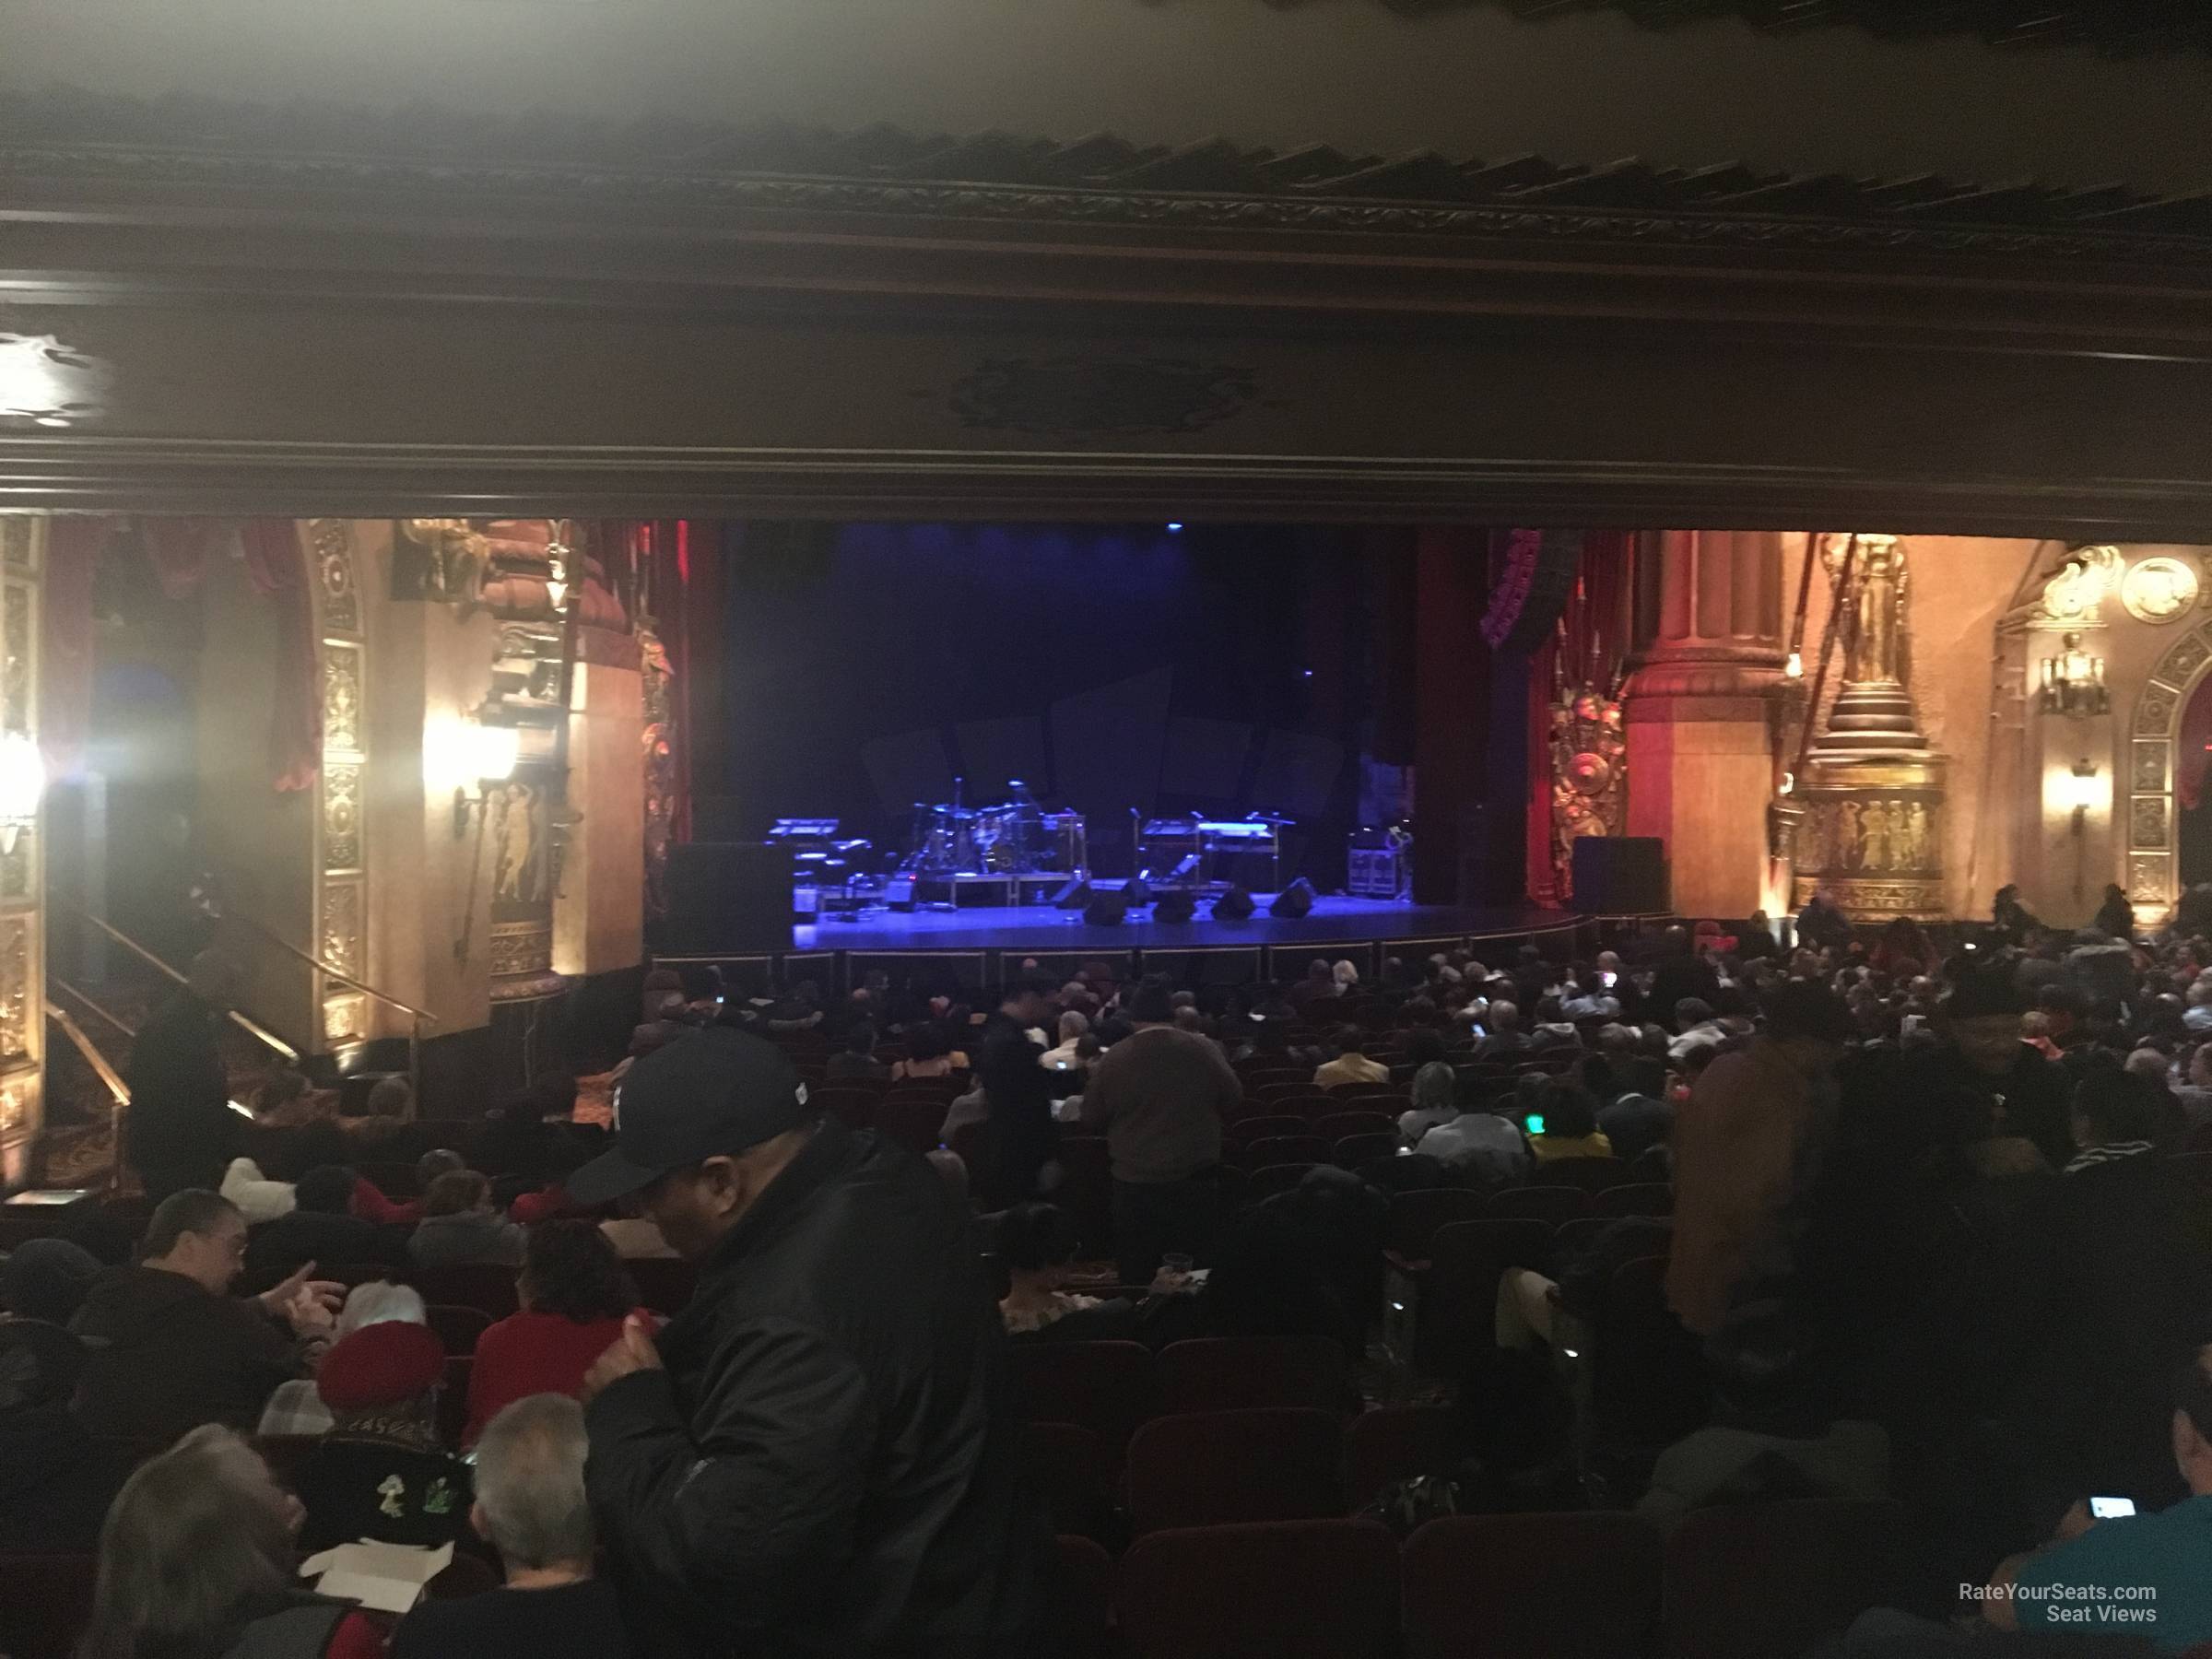 Beacon Theater Seating Chart Orchestra 1